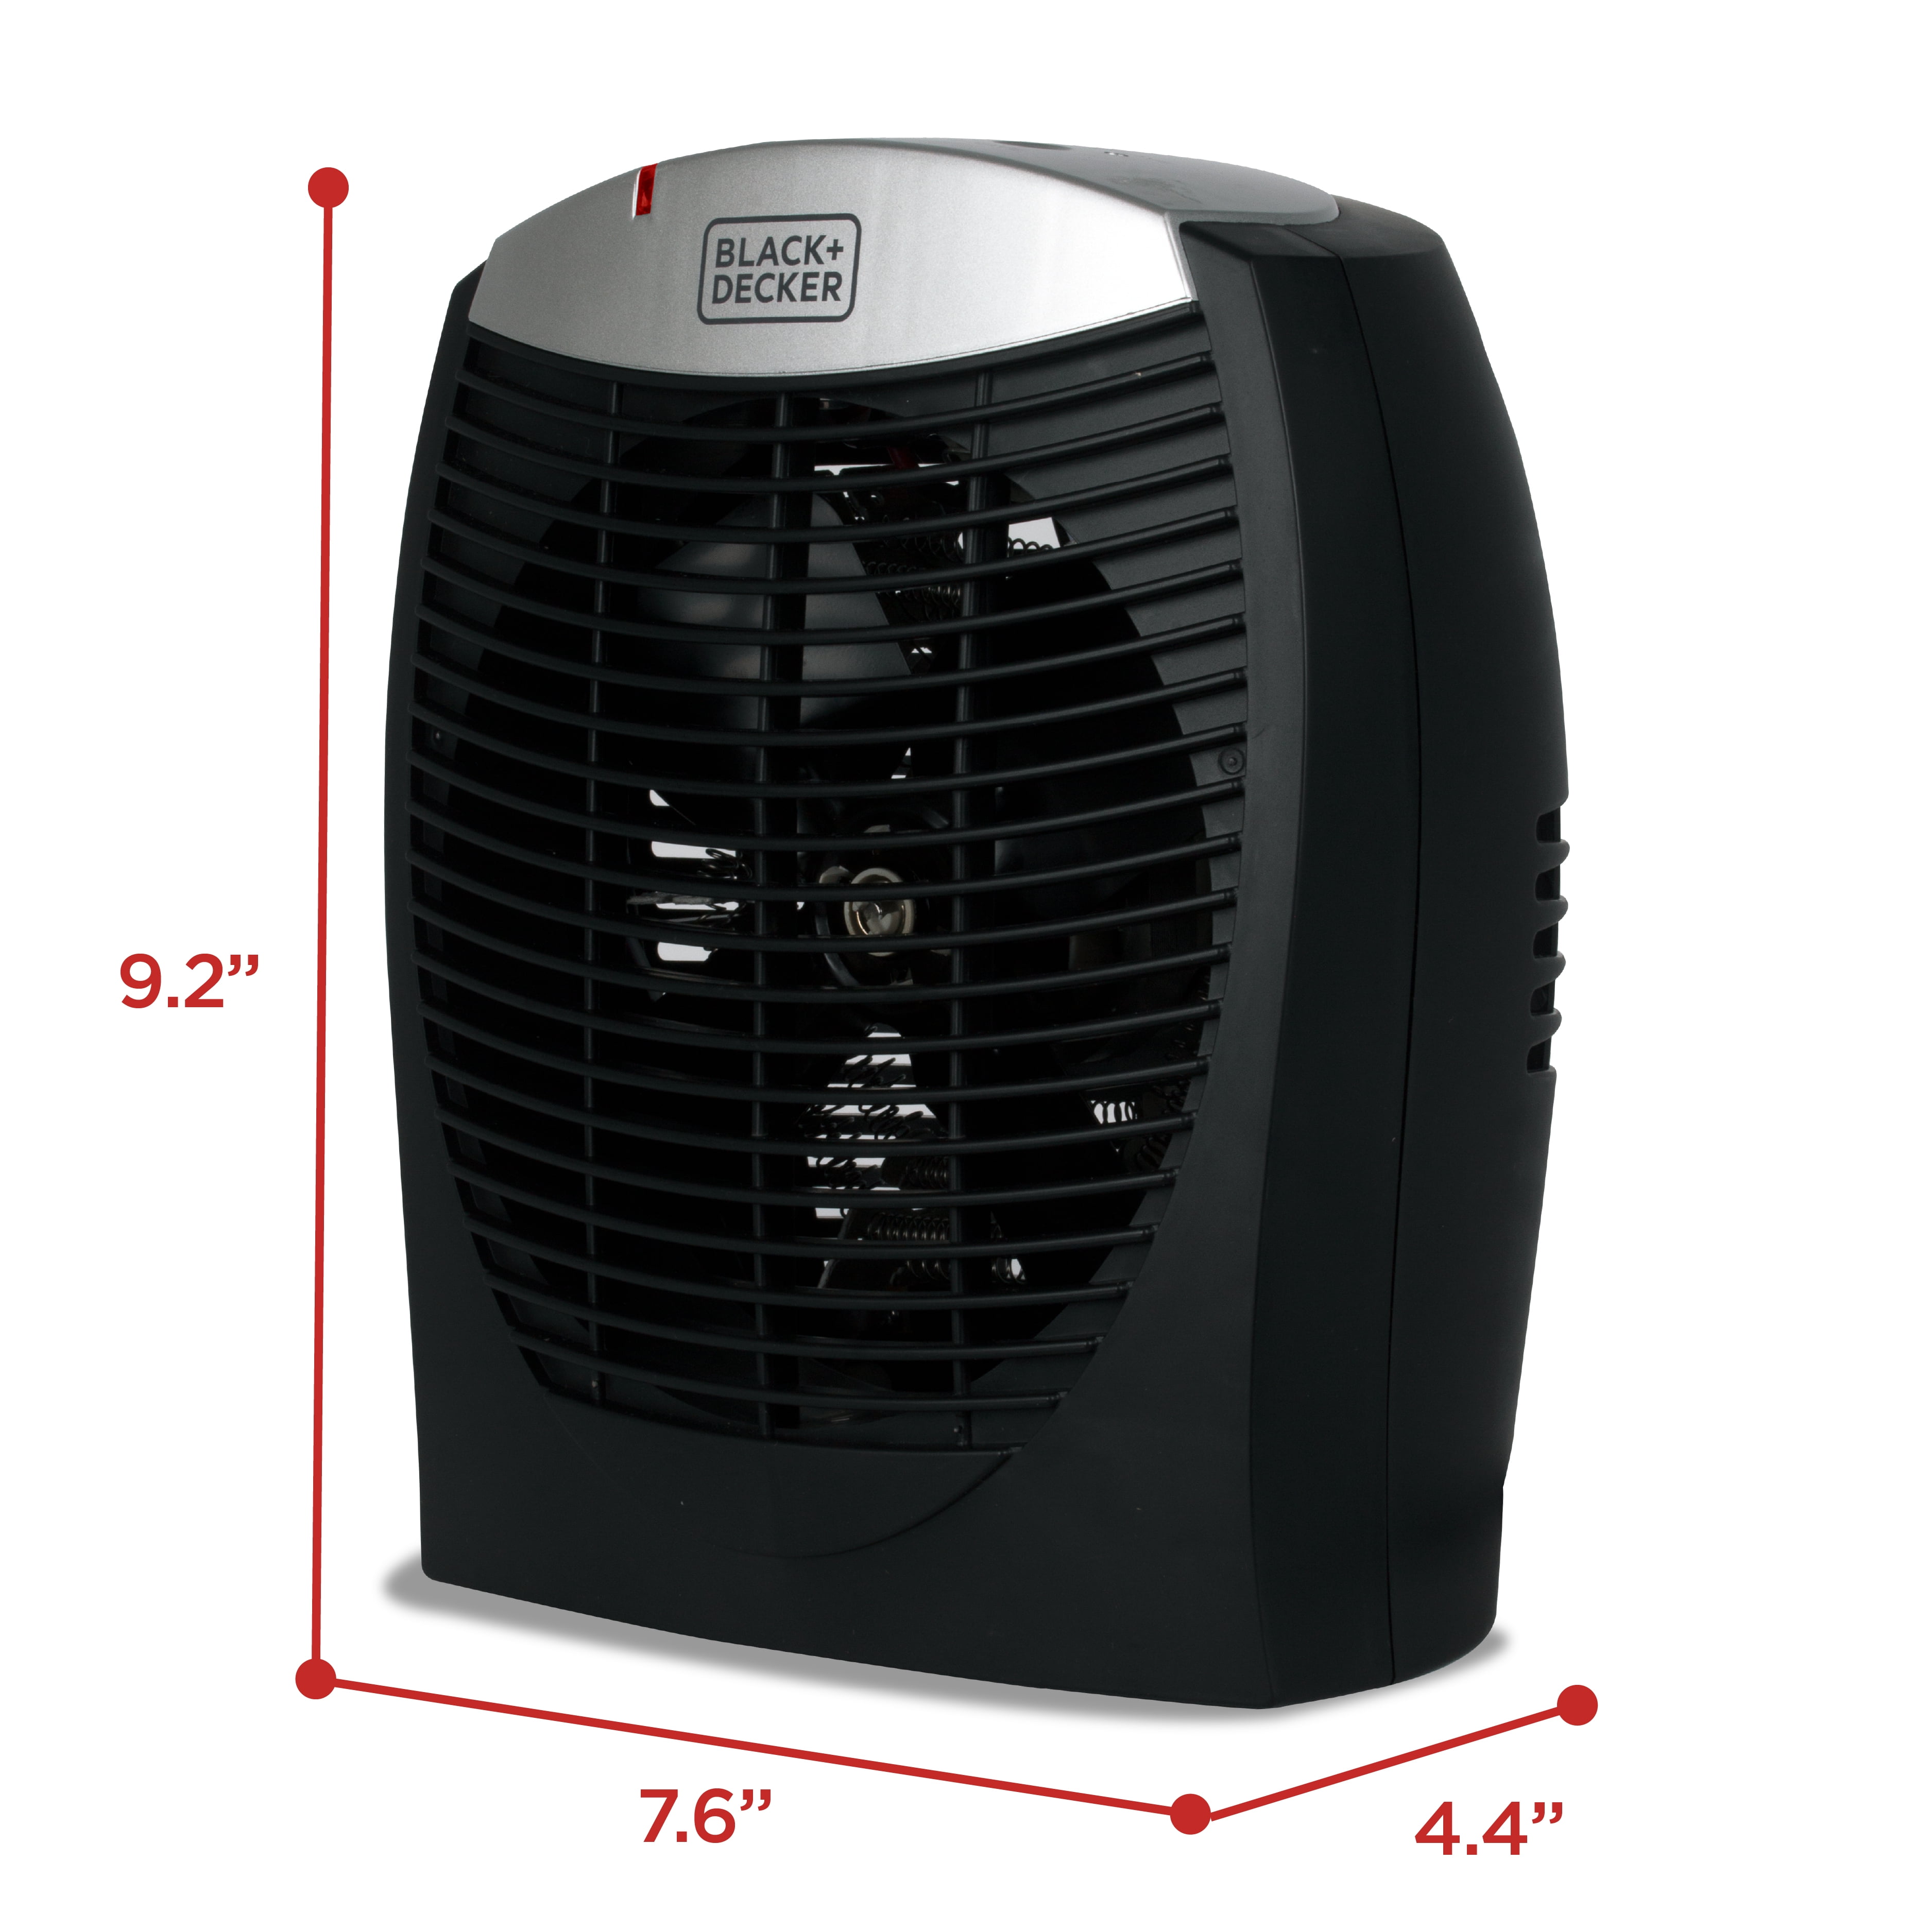 Black & Decker's New Portable A/C Heater - Does it live up to the